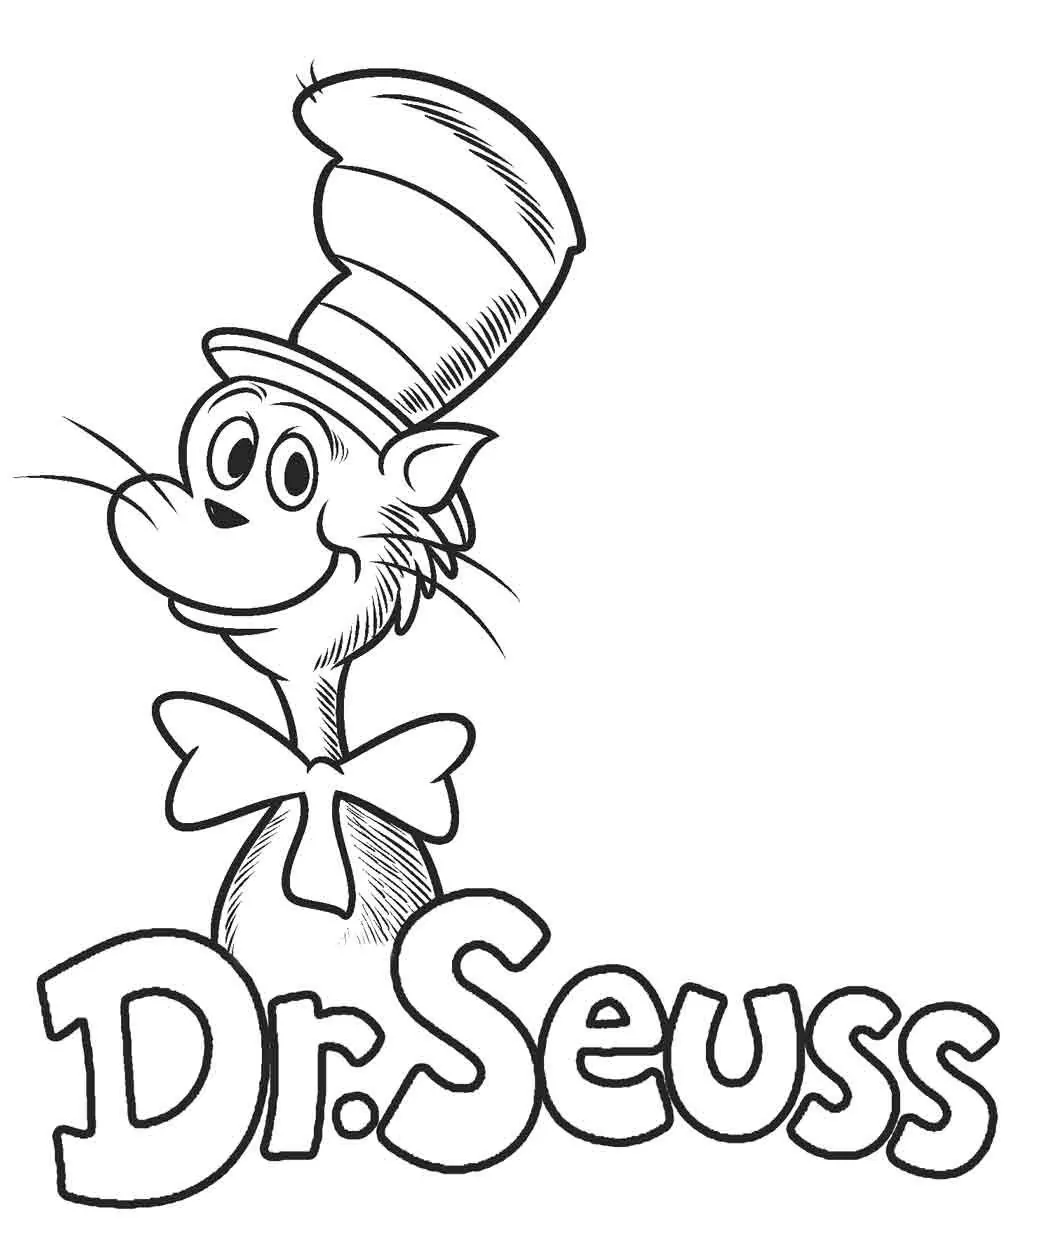 Dr. Seuss's Character